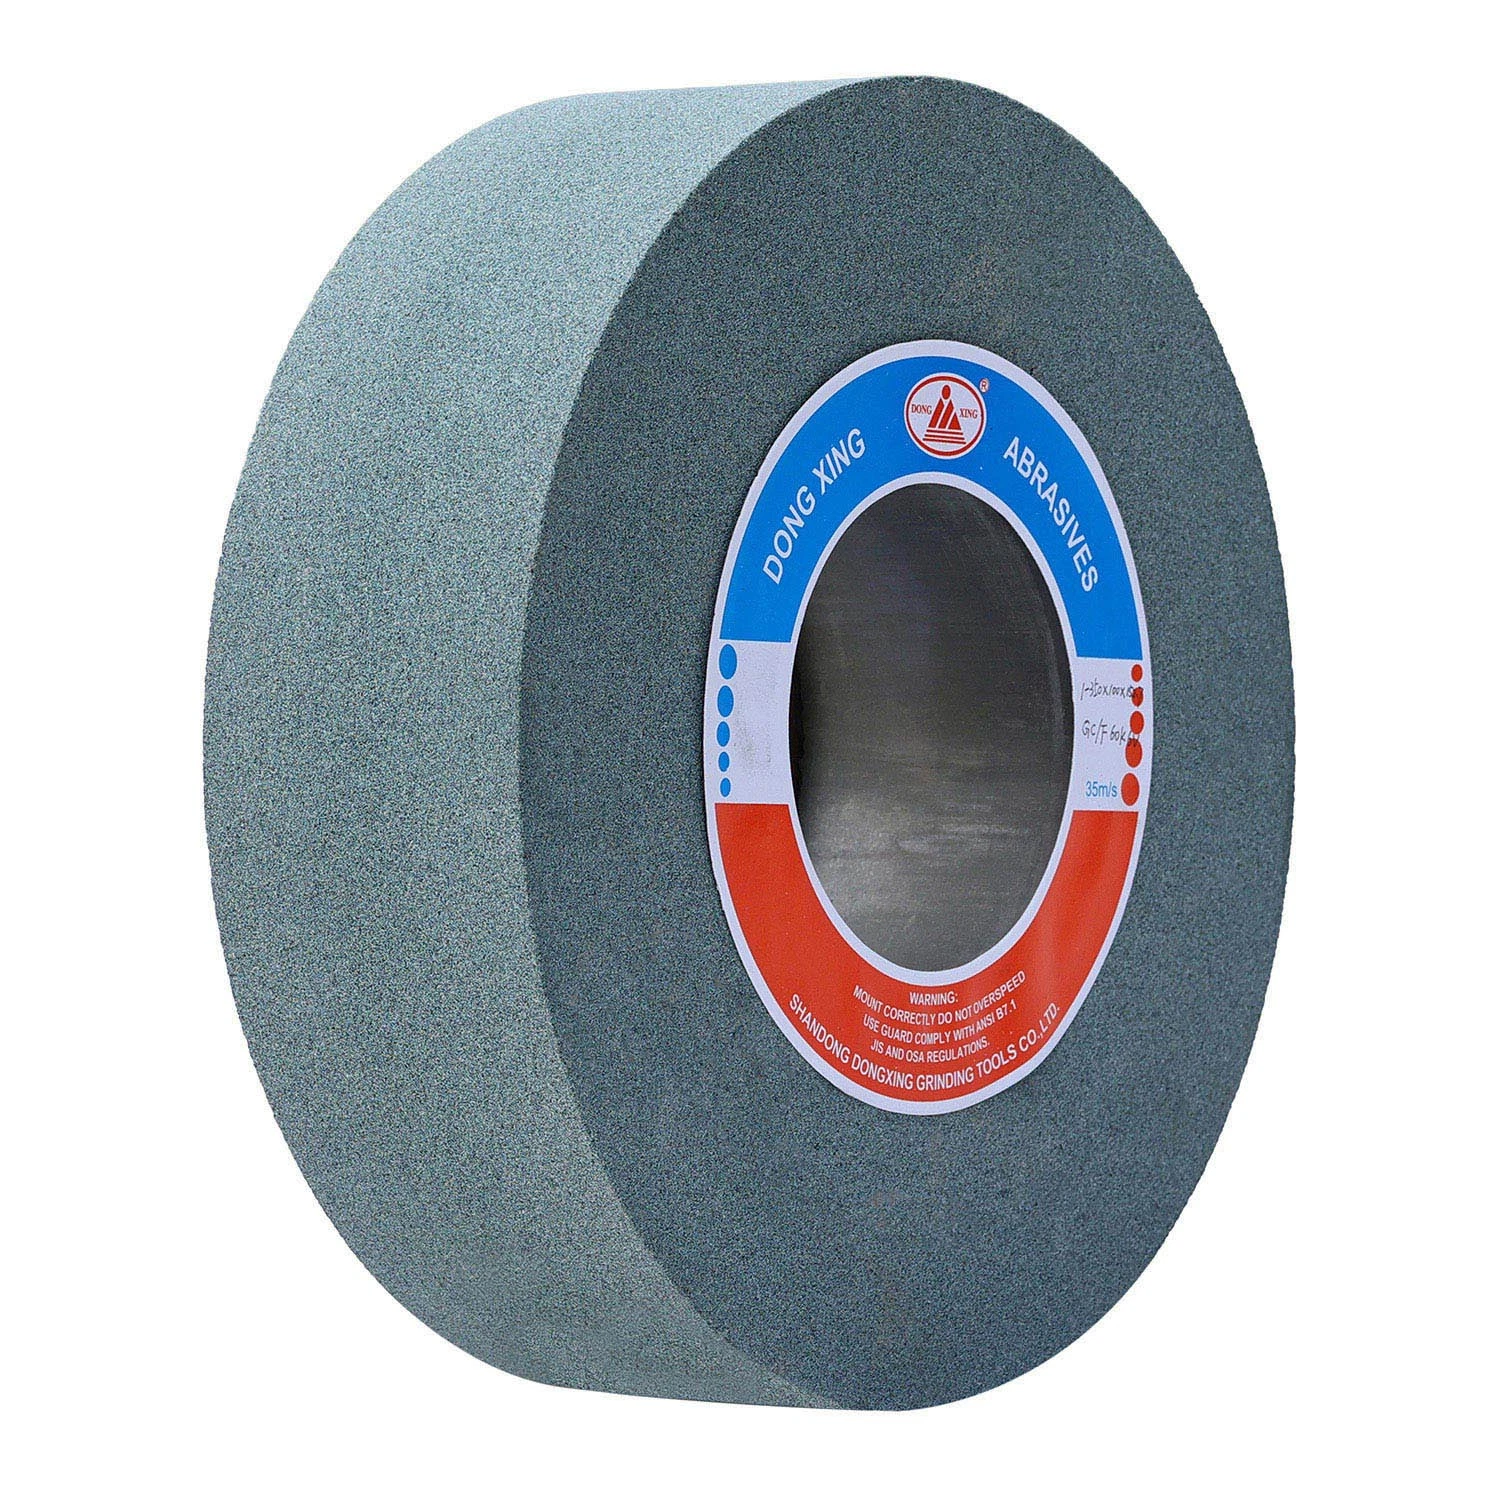 350mm Centerless Grinding for Vitrified Bond Abrasives Centerless Grinding Wheels Used for Short Axles Without Center Hole